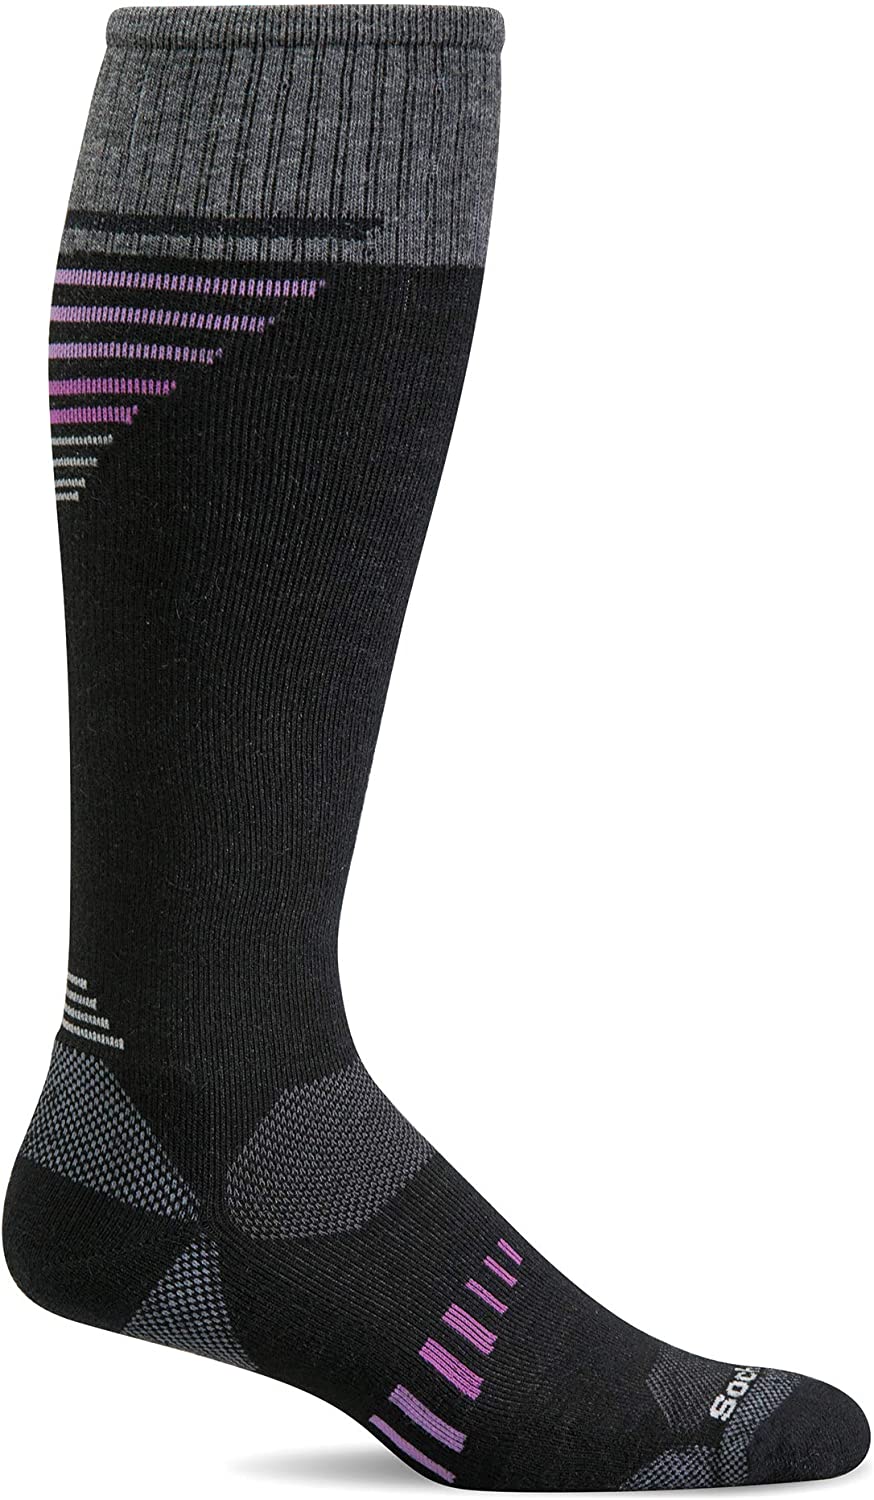 Sockwell Women's Ascend II Knee High Compression Sock in Black from the side